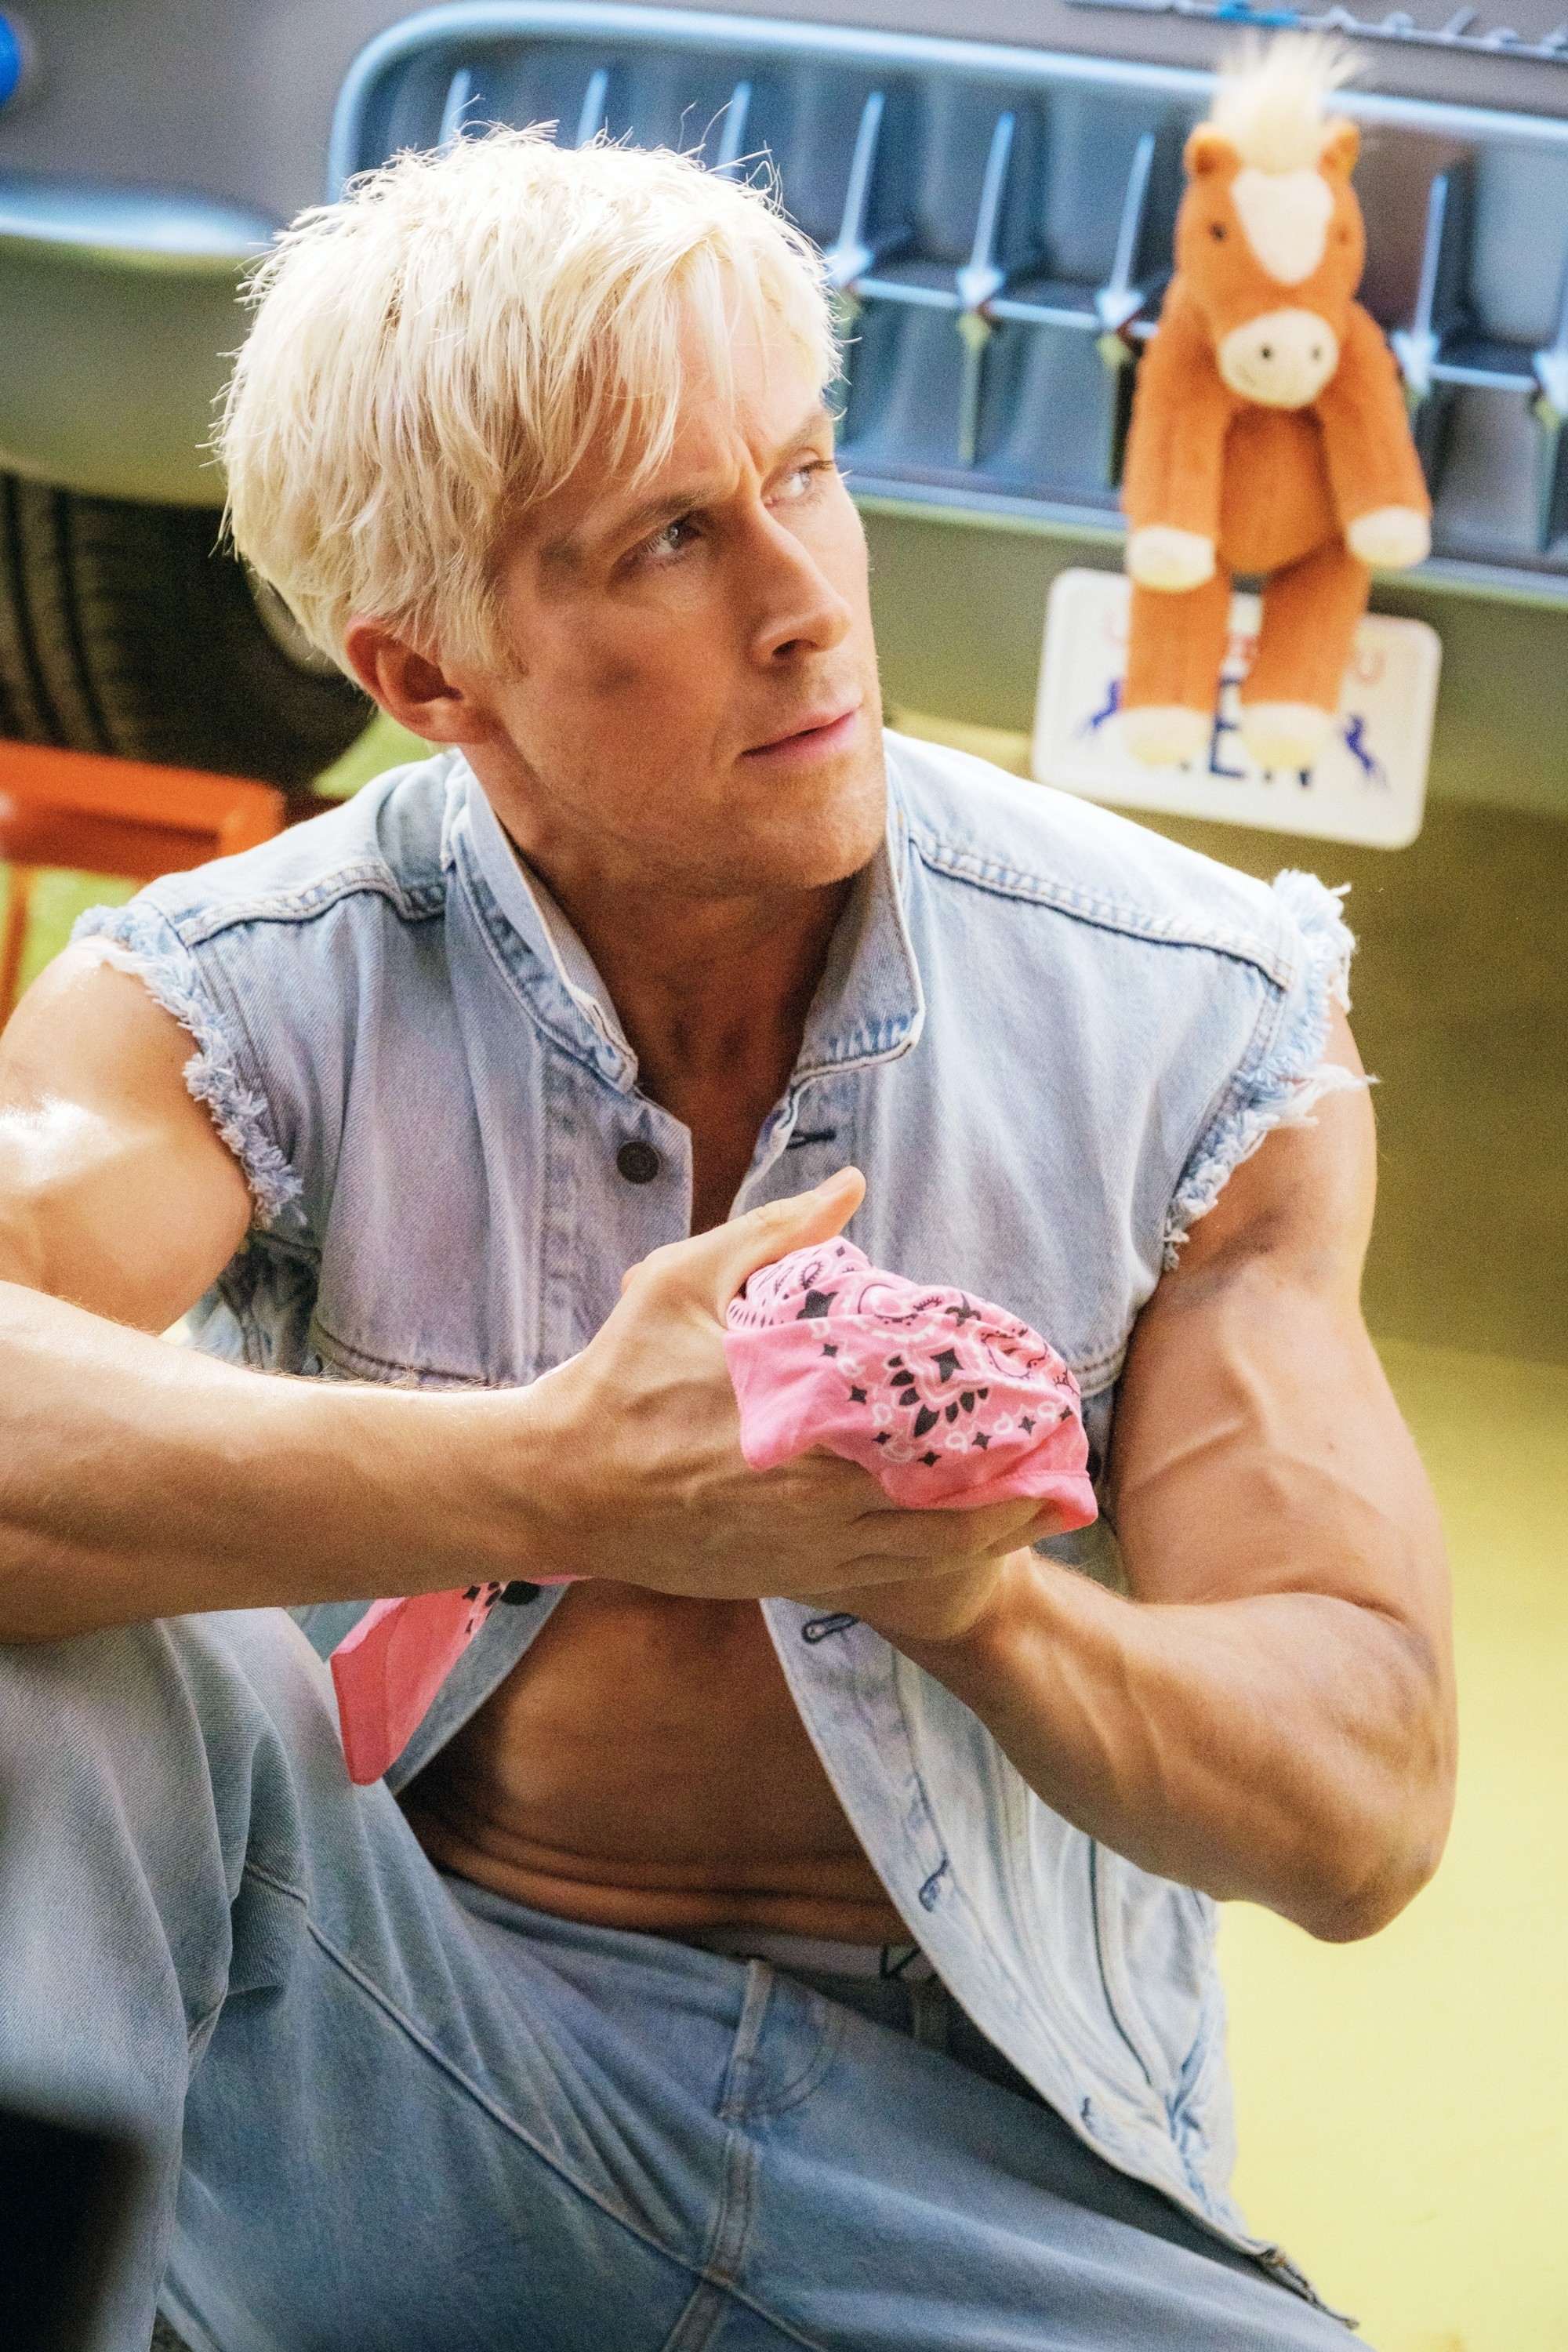 Ryan Gosling in character, wearing a denim vest, posing with an intense look, holding a pink object